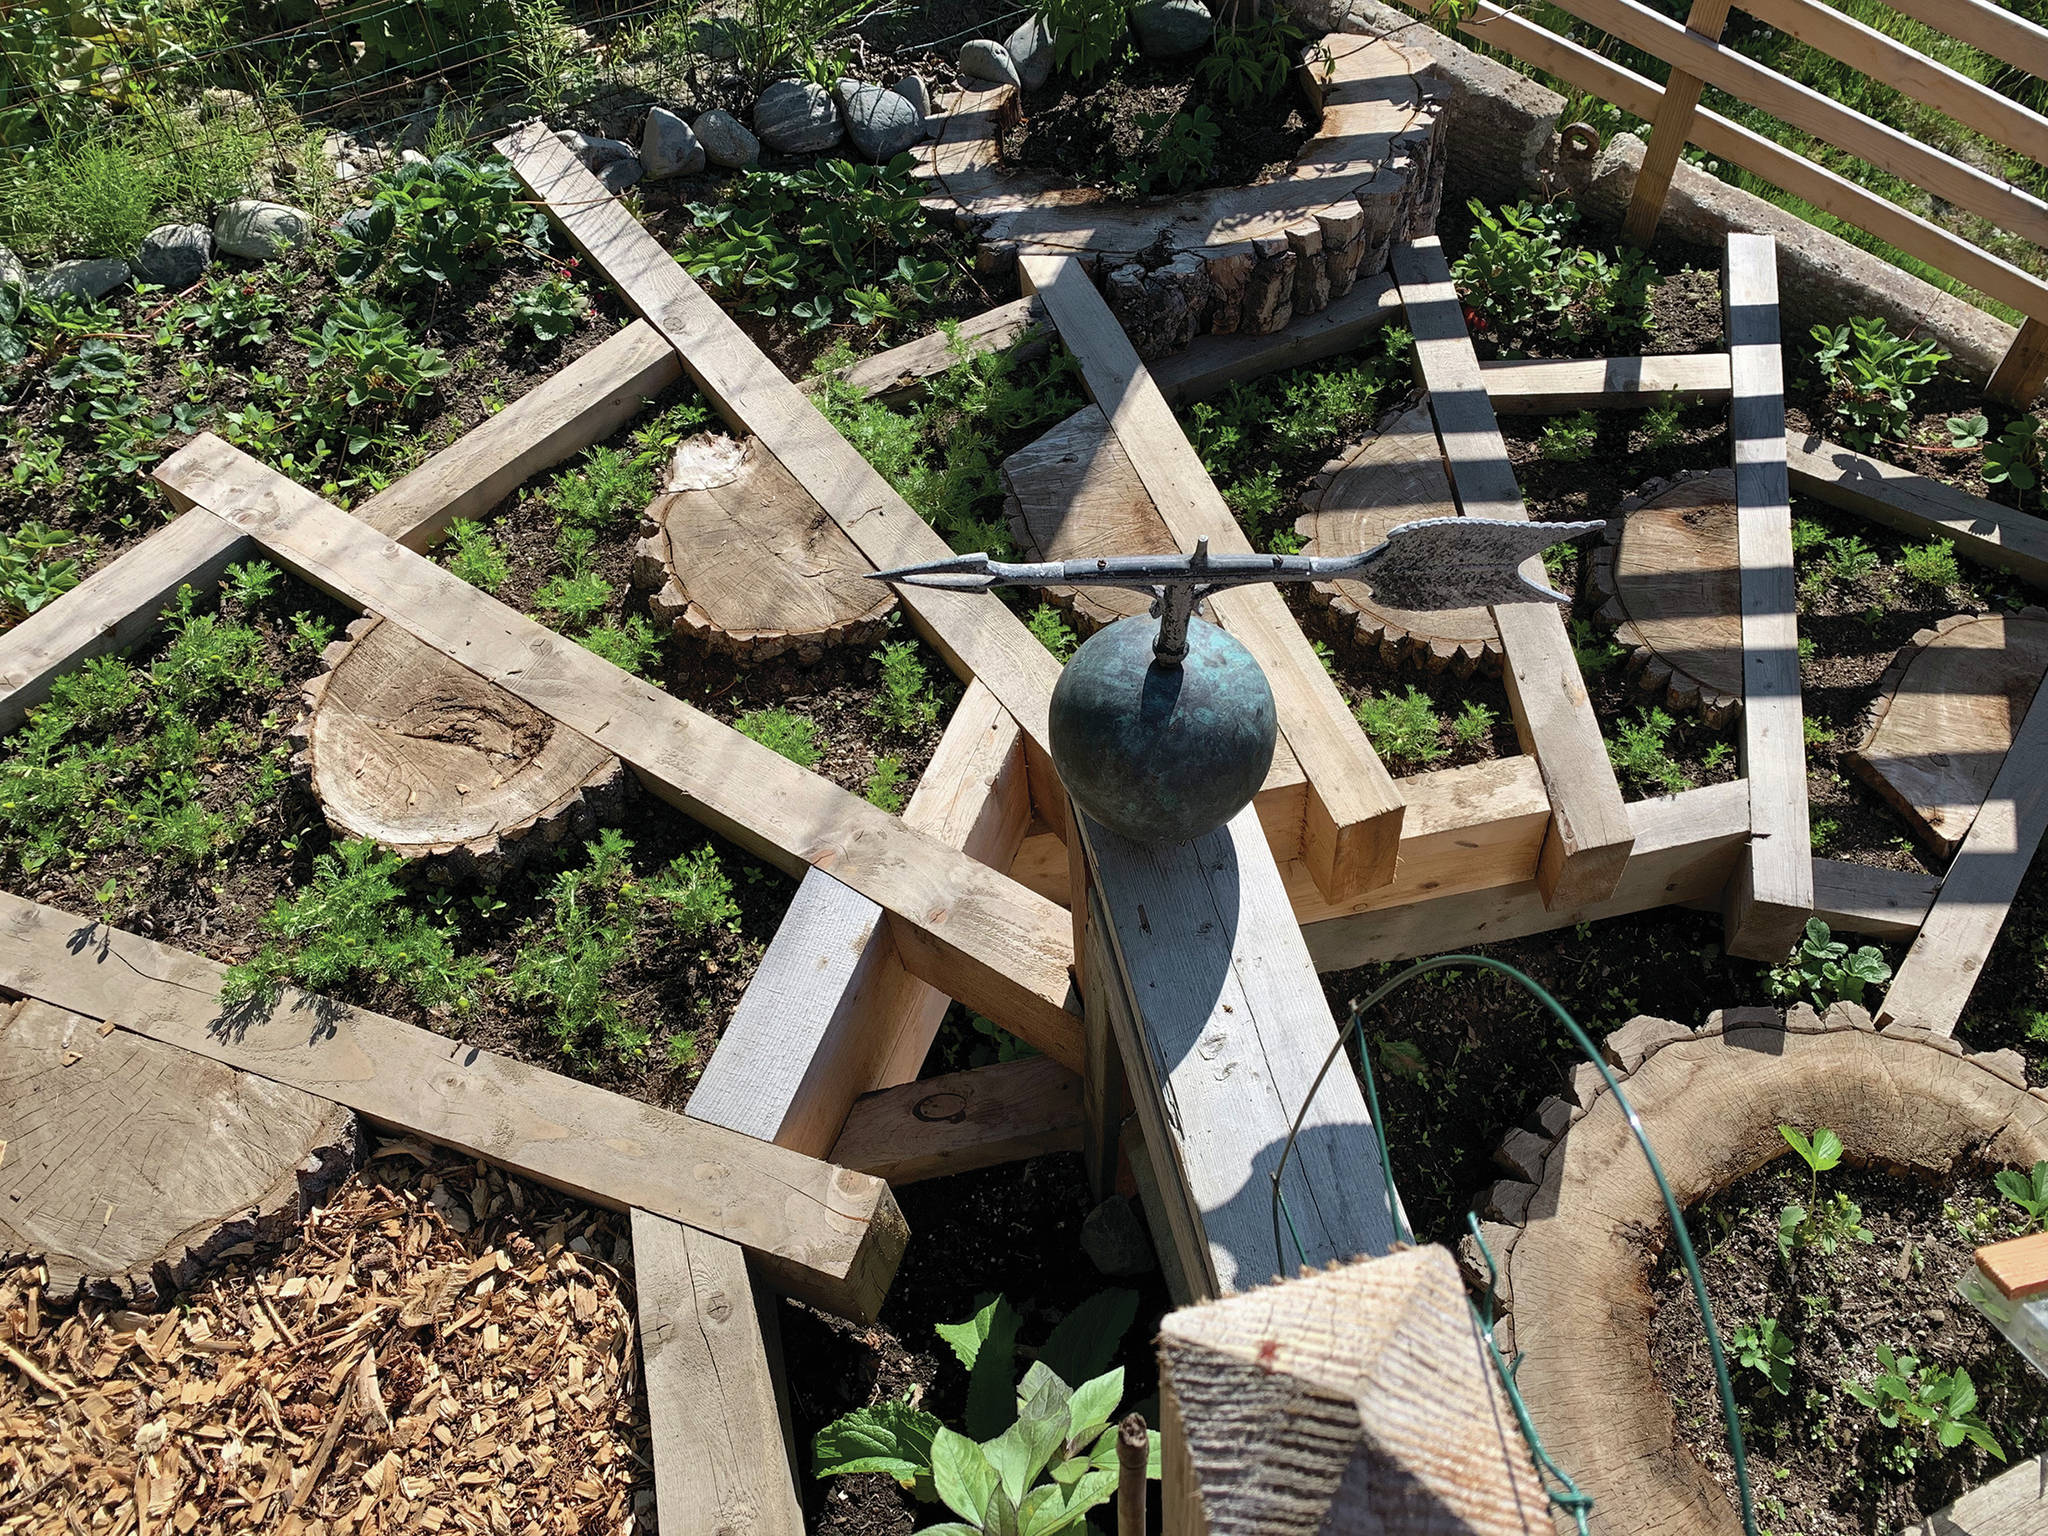 As seen here on Monday, June 22, 2020, at their Homer, Alaska, beach home, Debi Poore and Charlie Gibson’s stairway leads to their new greenhouse, with planks crosscut from a cottonwood log and interplanted with pineapple weed. (Photo by Rosemary Fitzpatrick)